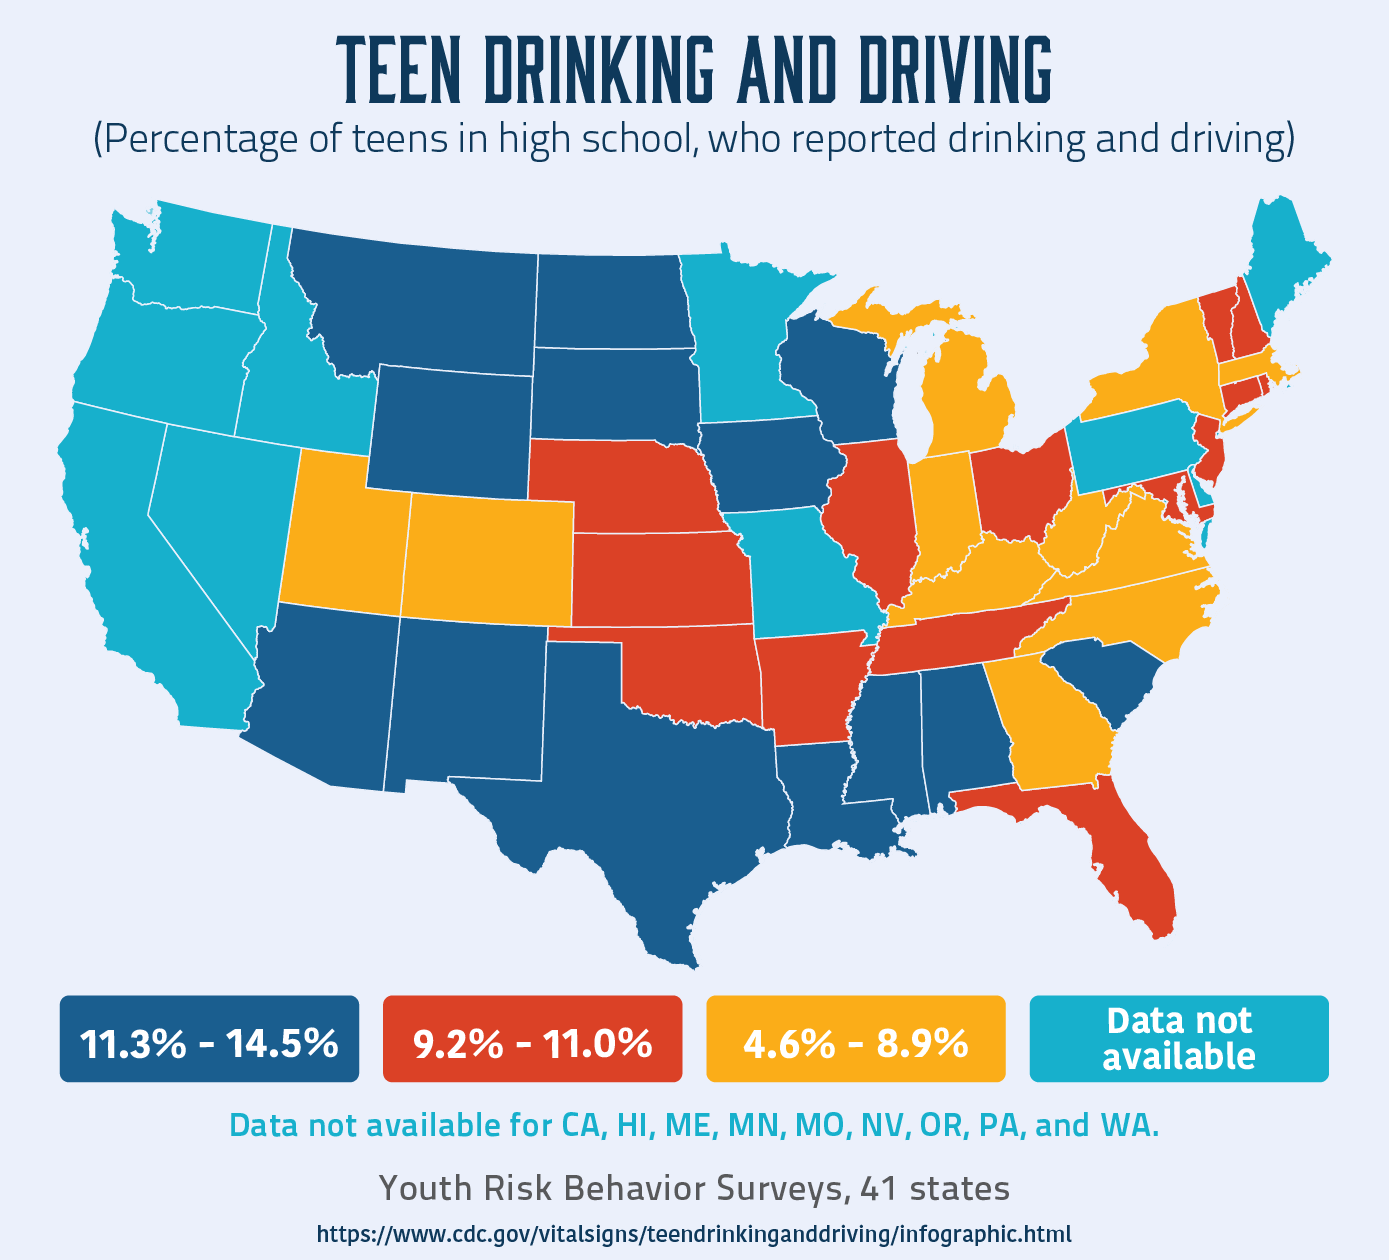 Do teens admit to drinking and driving in your state?